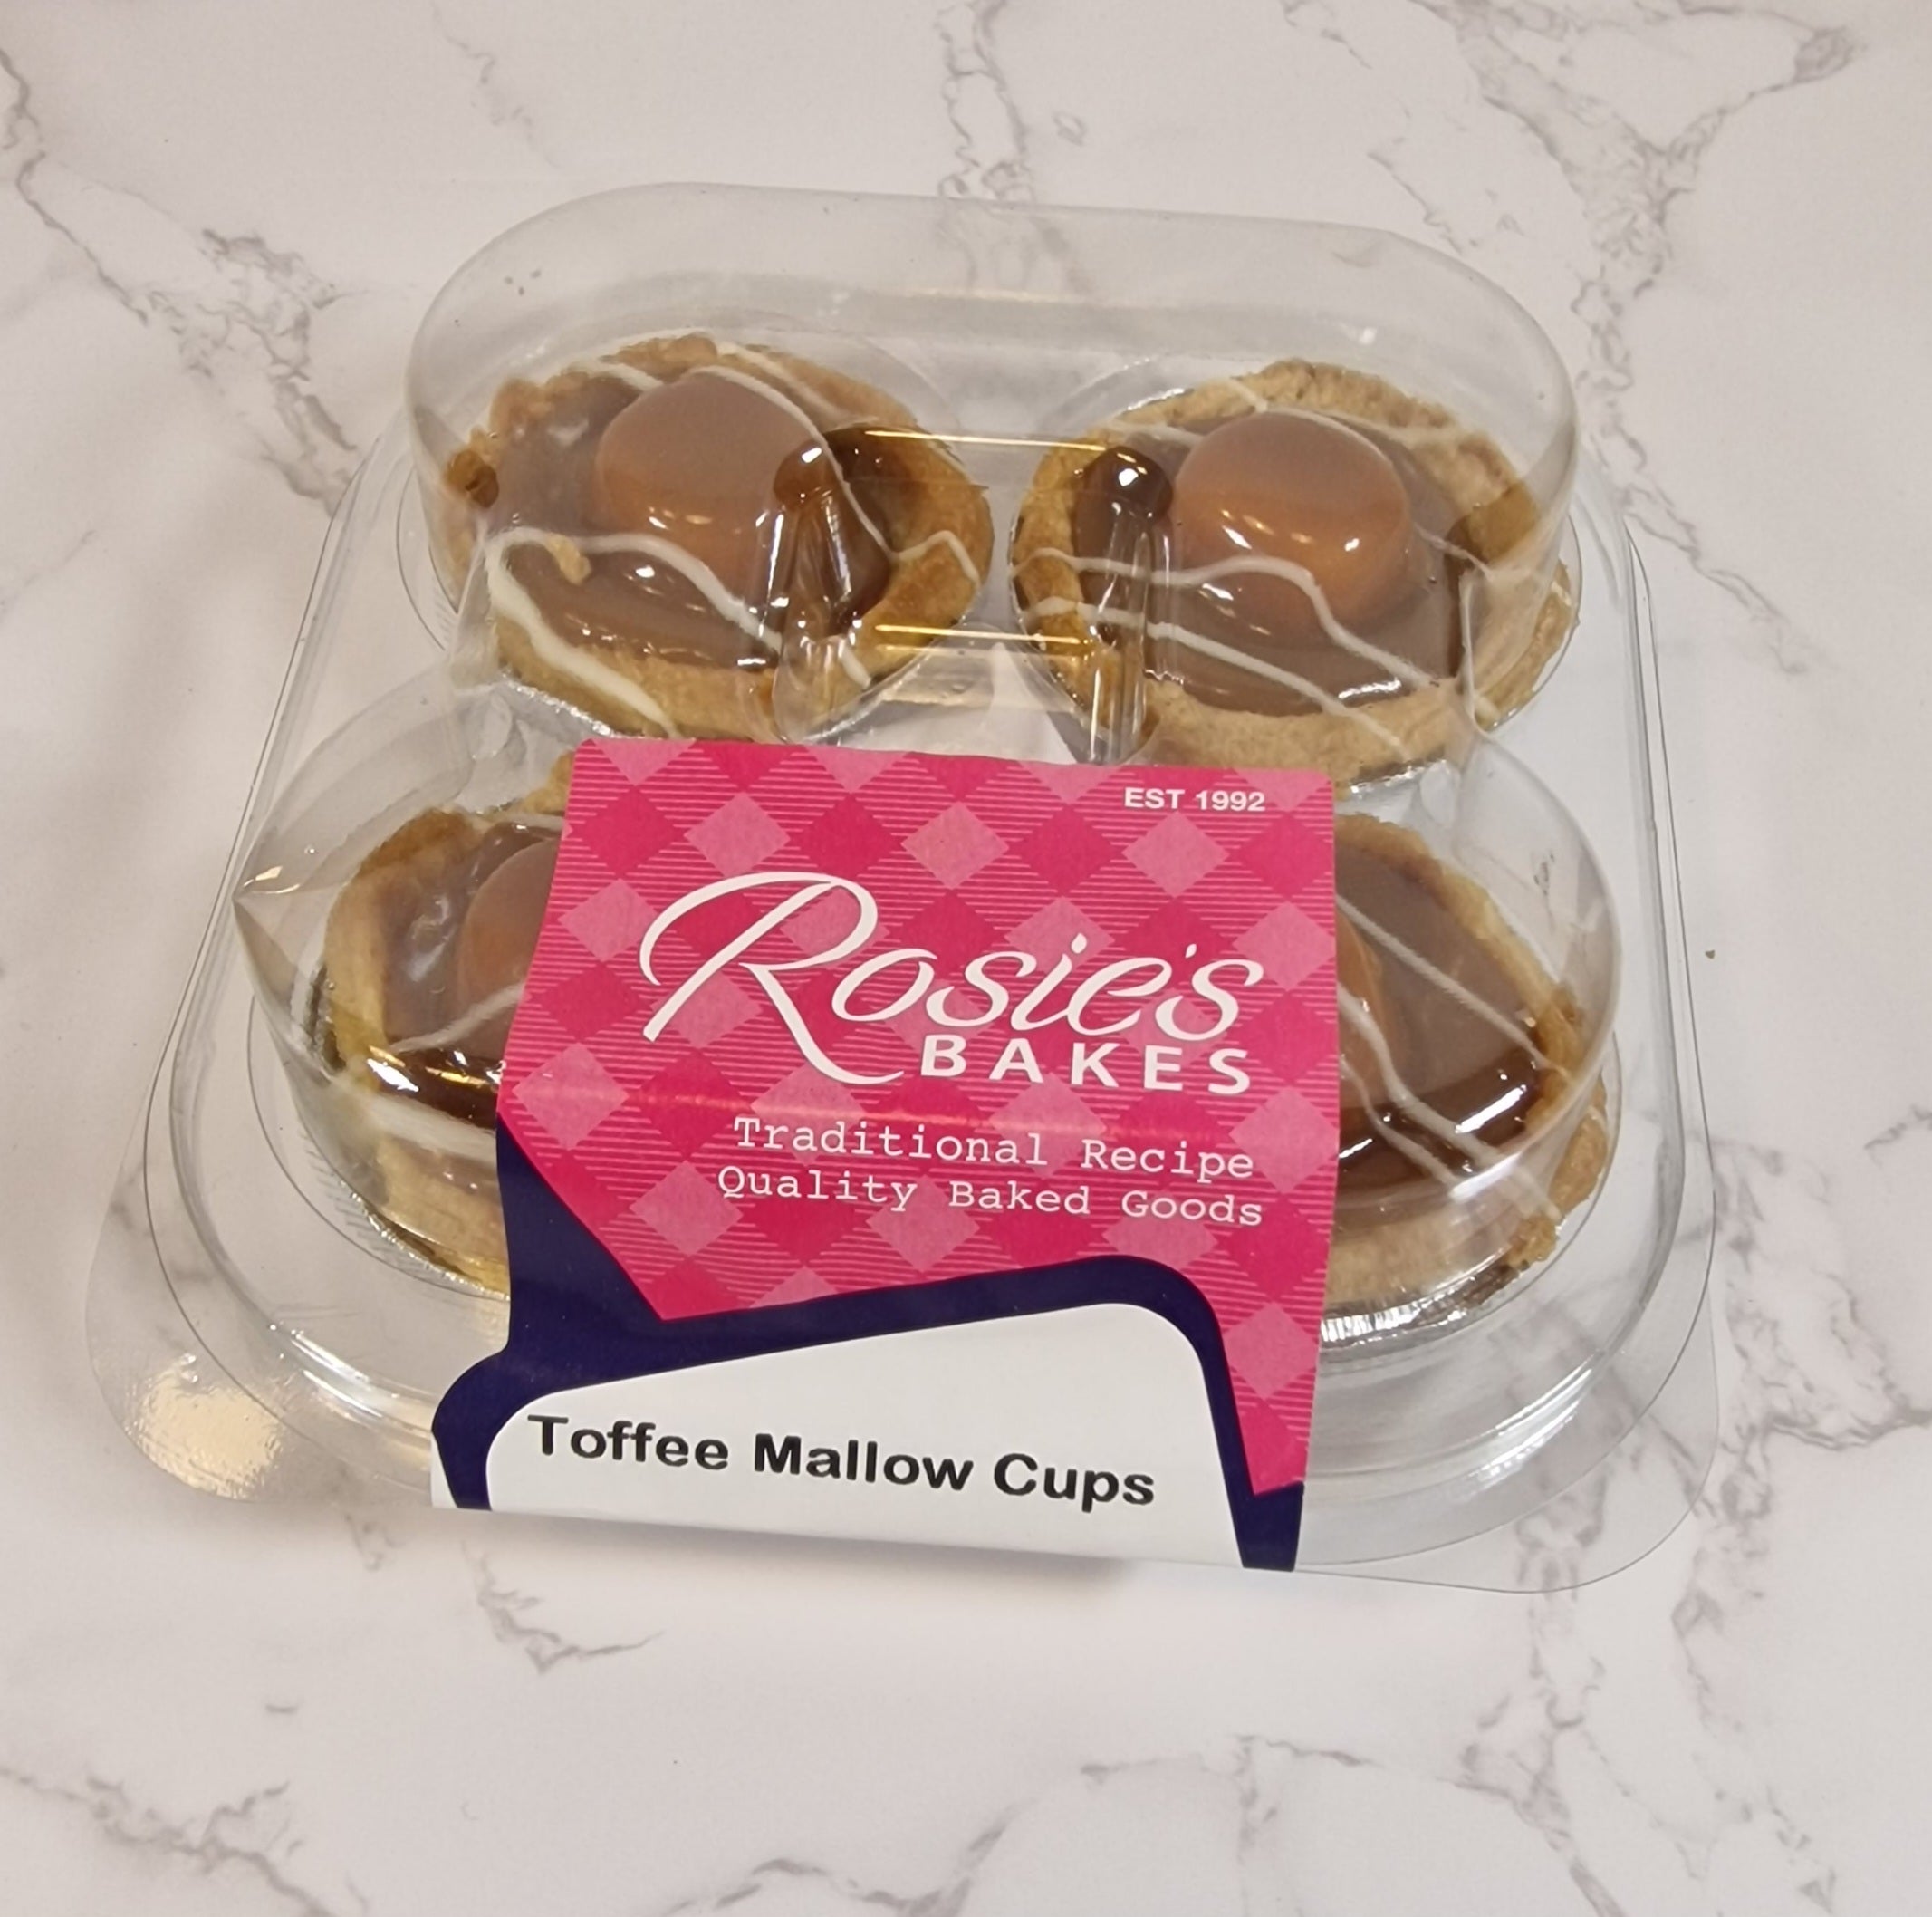 Toffee Mallow Cups